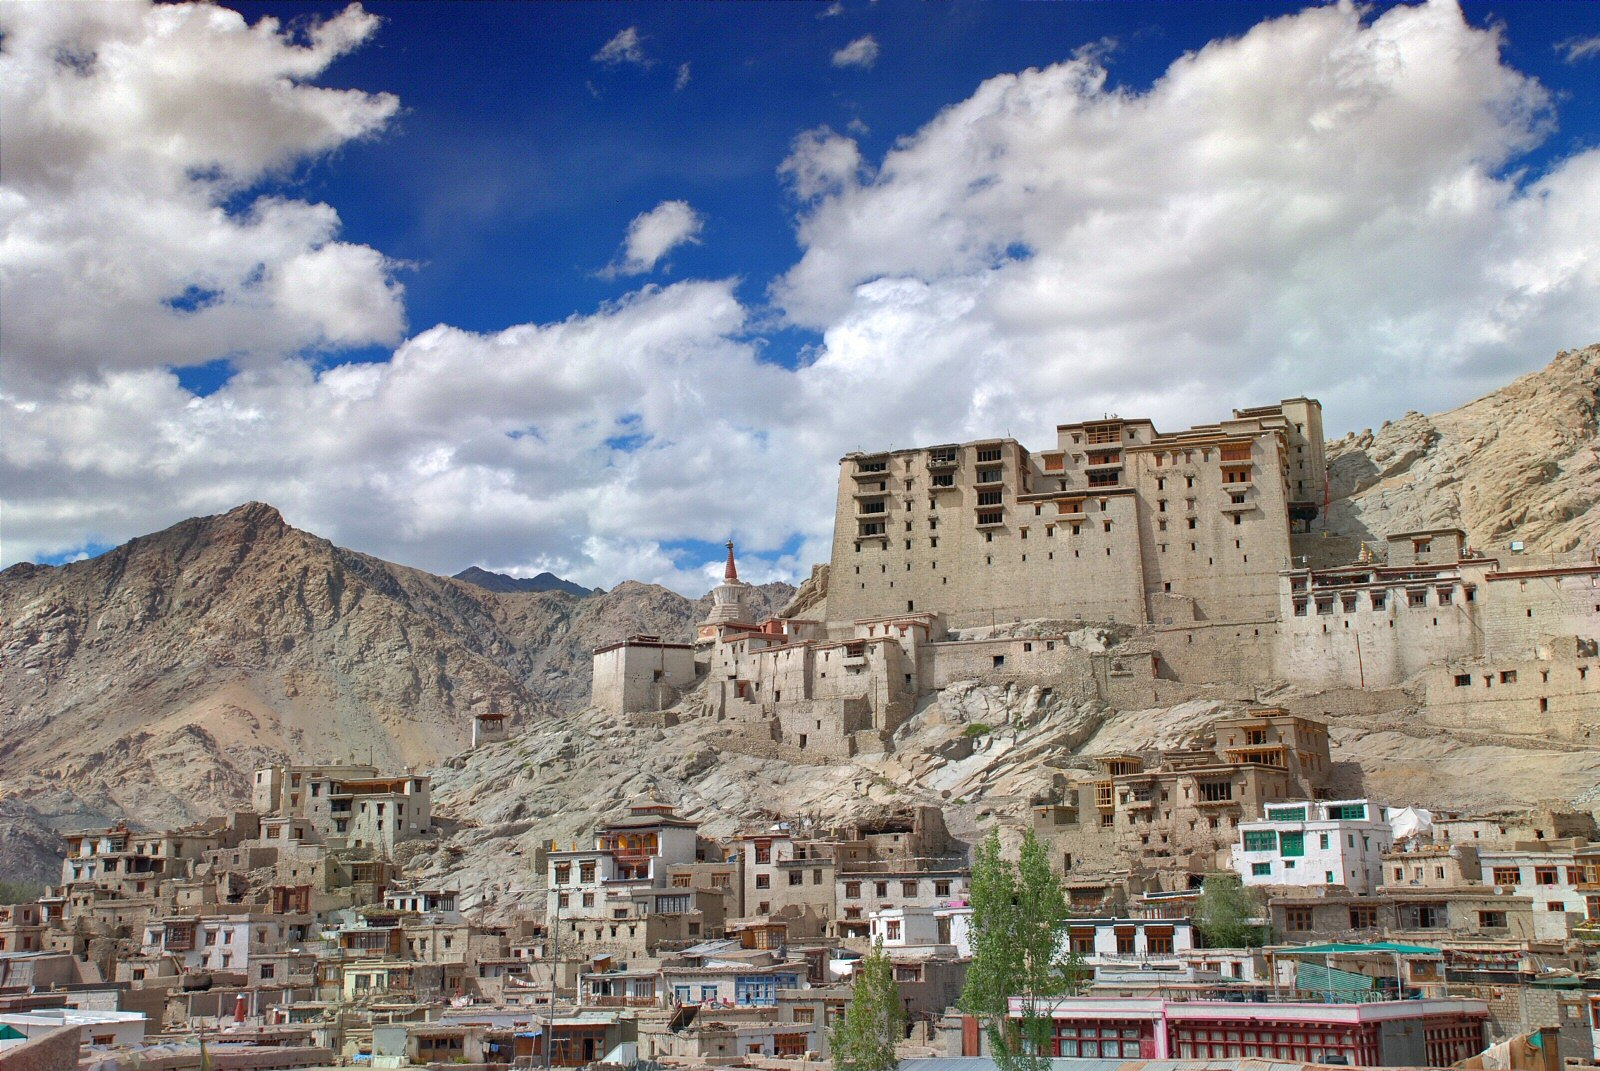 Ladakh Himalayan kingdom among the world’s highest inhabited plateaus in a harsh climate